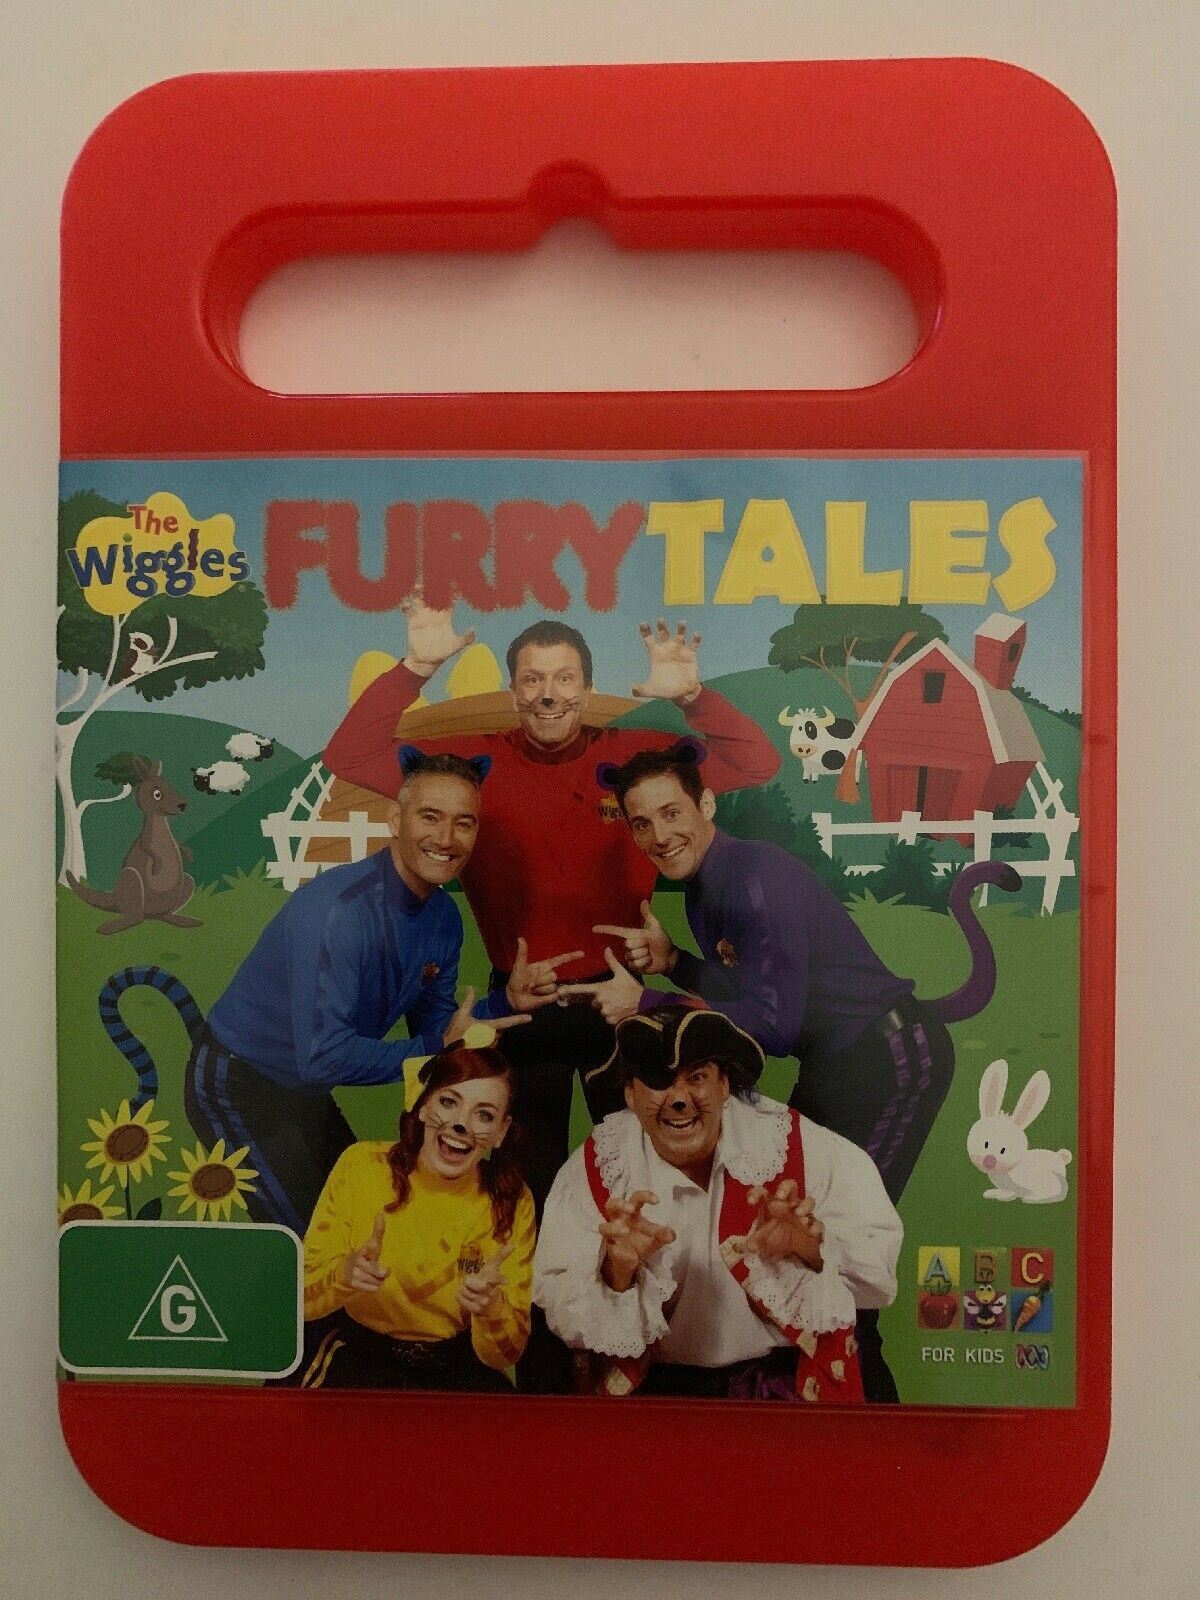 The Wiggles - Furry Tales (DVD, 2013) Region 4, ABC For Kids